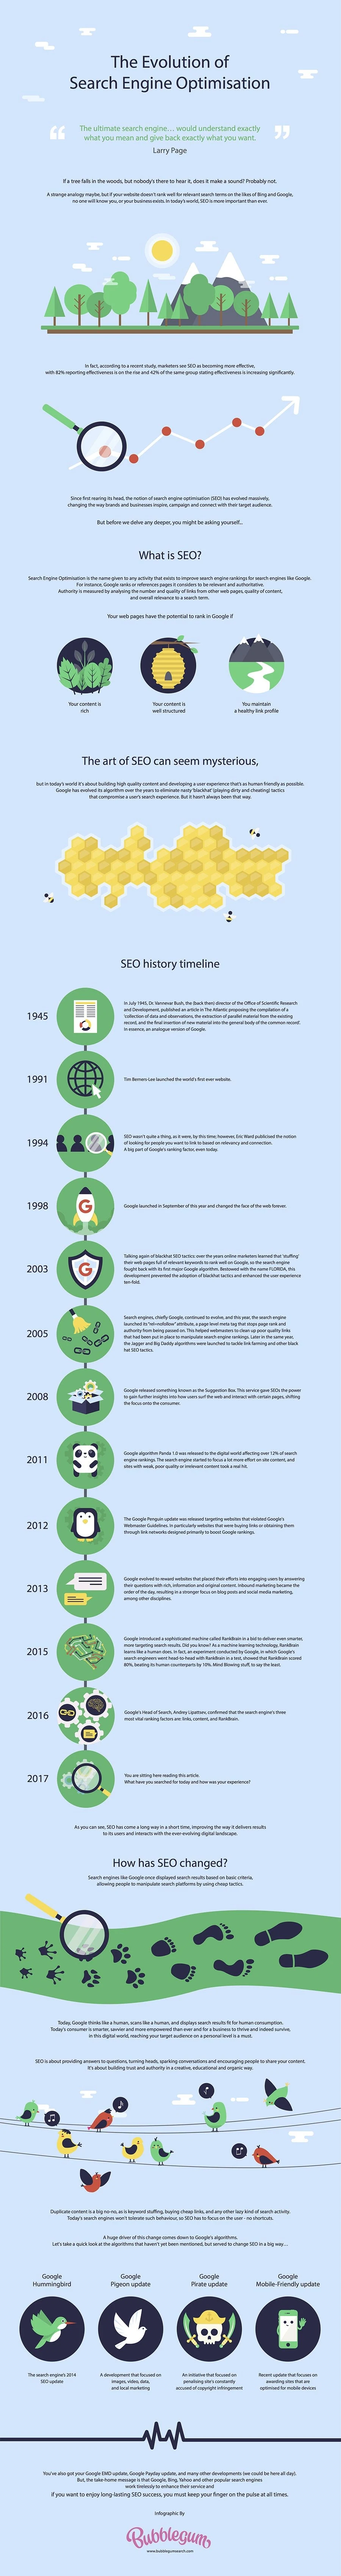 The Evolution of SEO - #Infographic